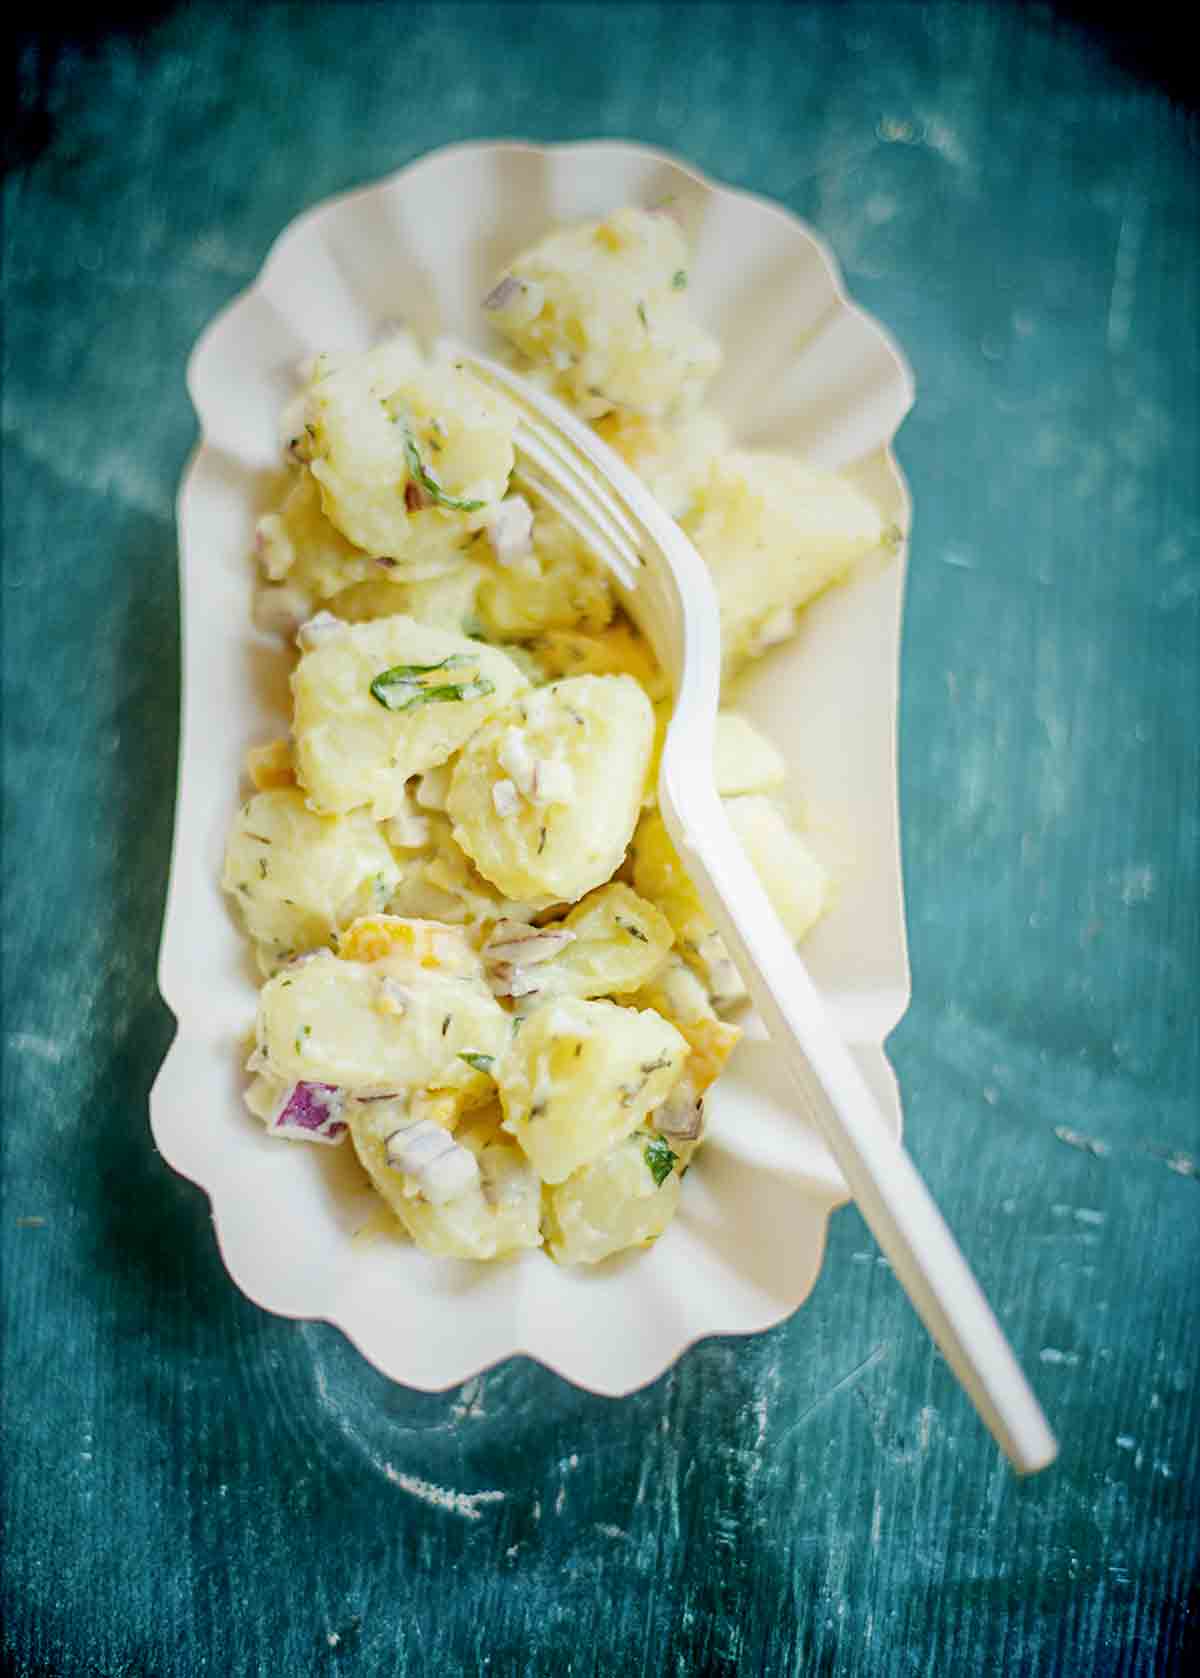 A cardboard bowl filled with easy potato salad an a plastic fork resting on top.